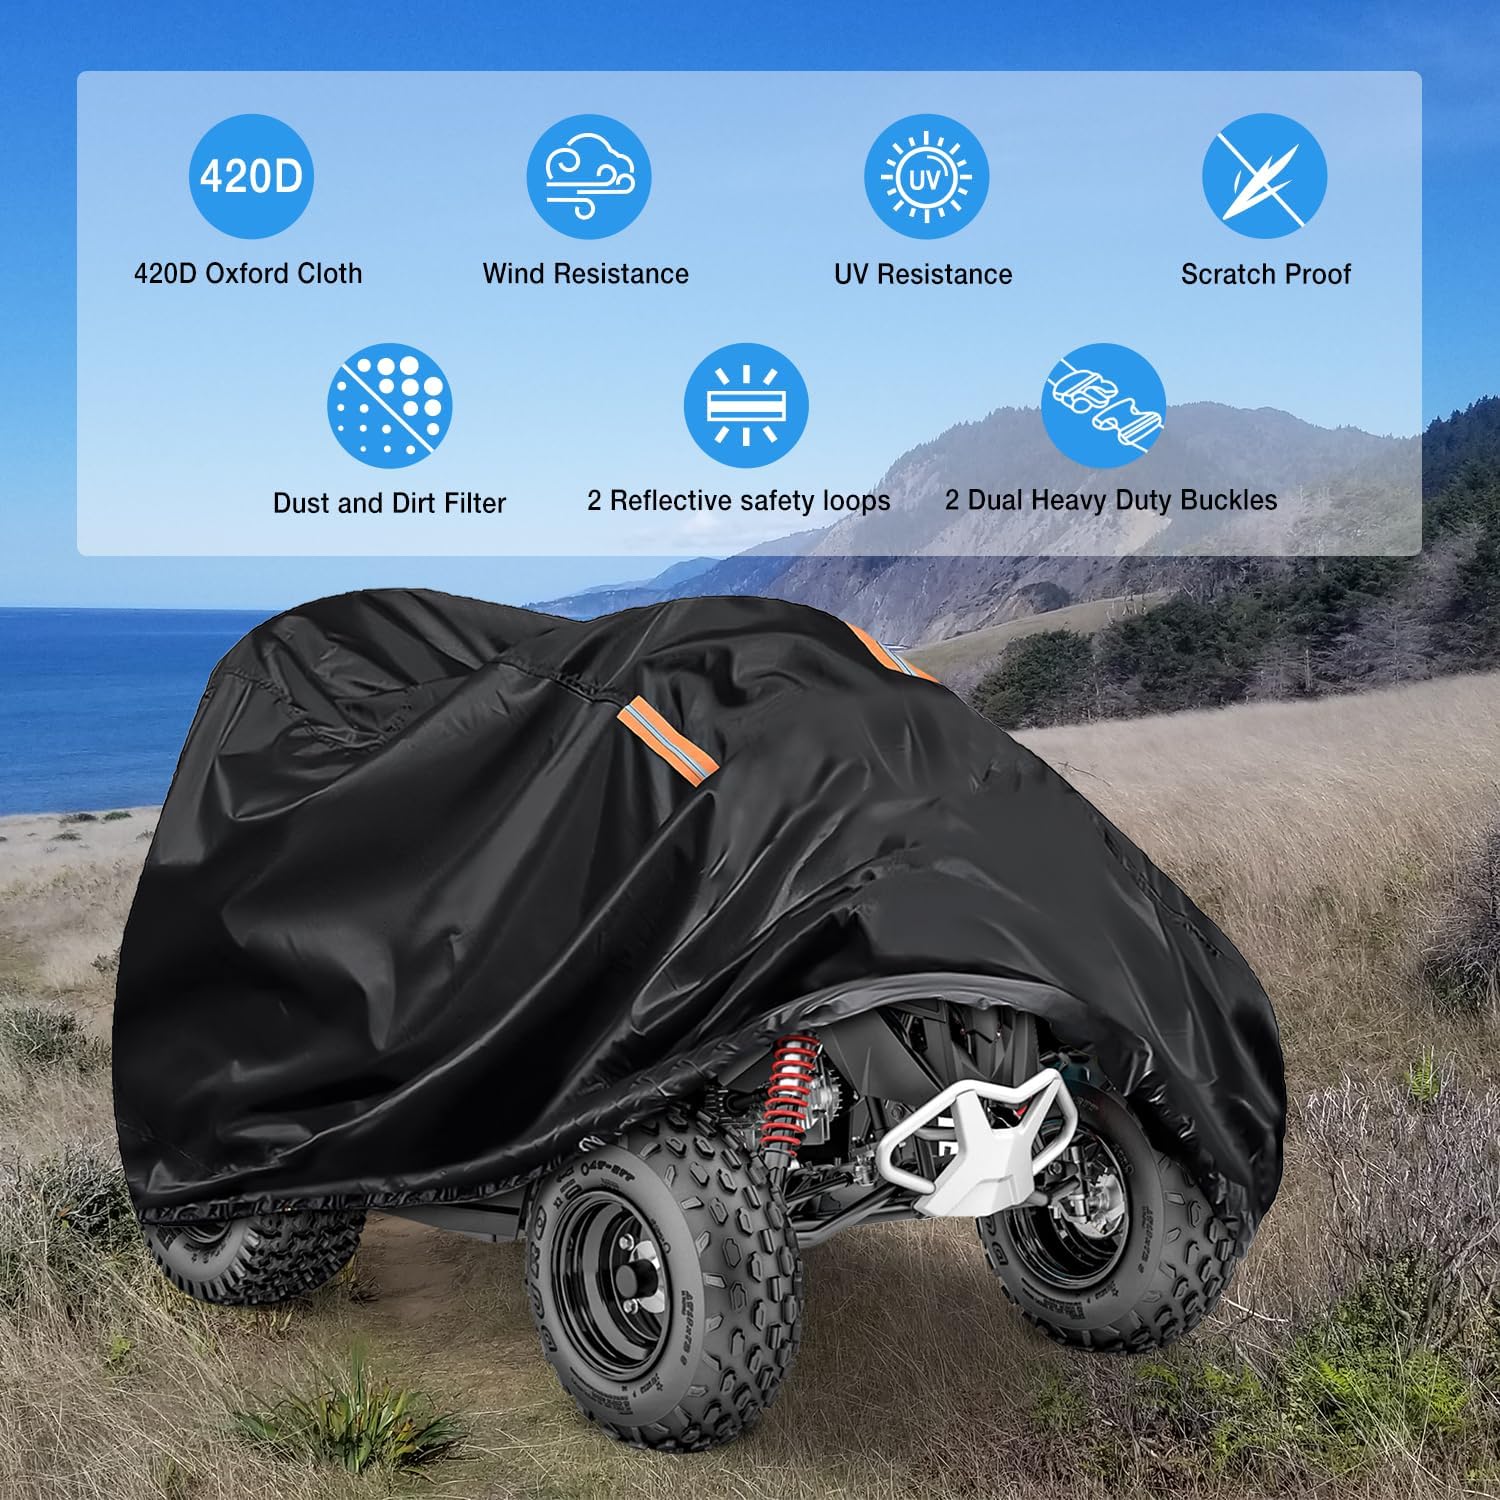 ATV Cover Waterproof 420D Heavy Duty Ripstop Material Black Protects 4 Wheeler from Snow Rain All Season All Weather UV Protection Fits up to 86" Nilight